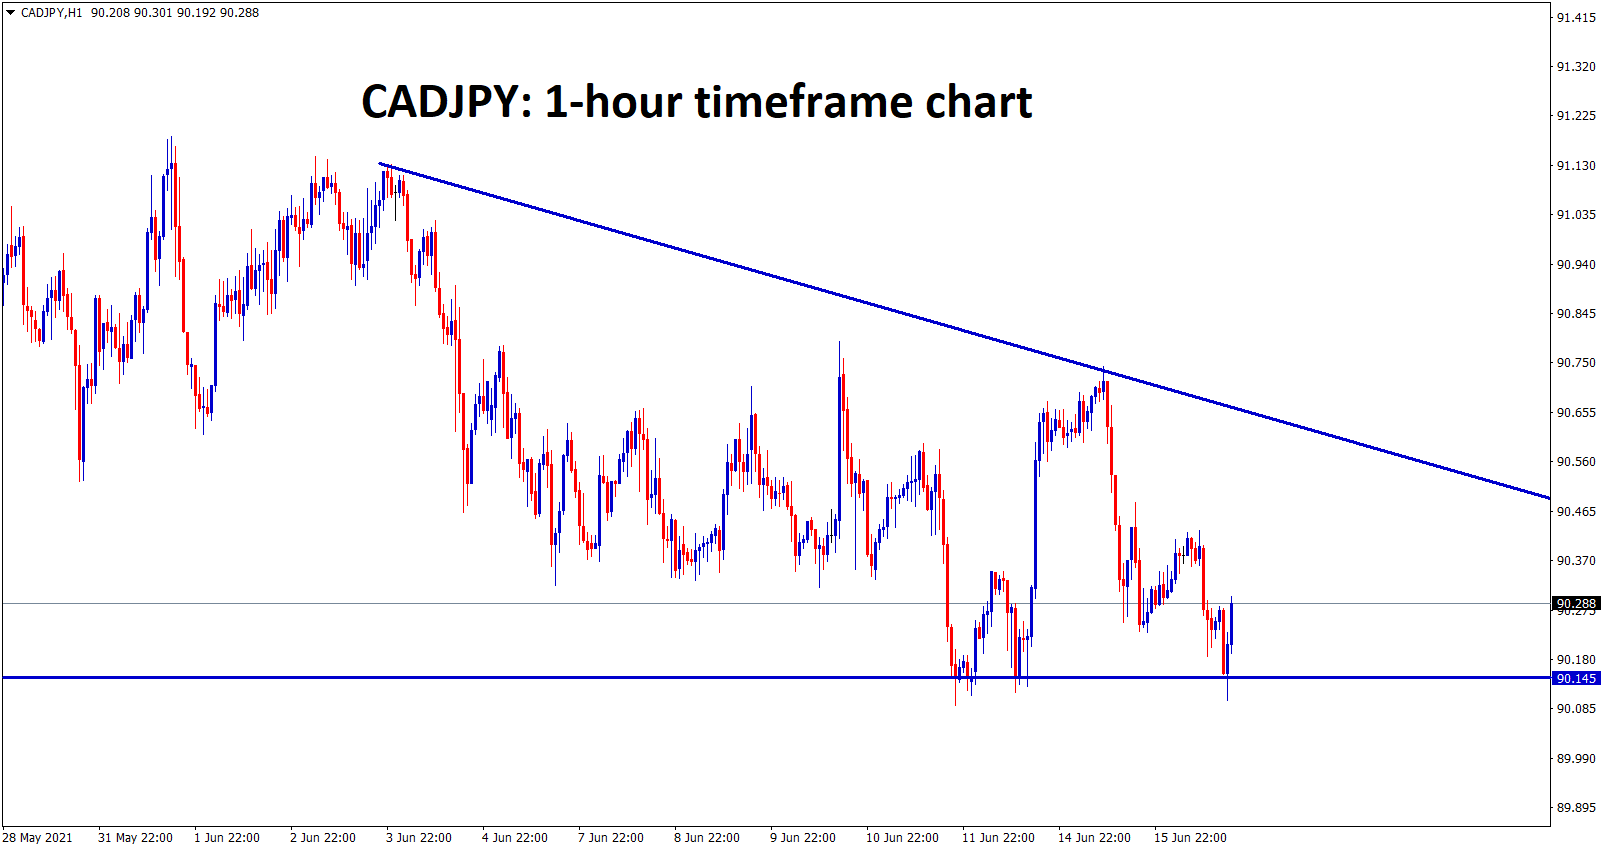 CADJPY is moving between the Descending Triangle pattern now